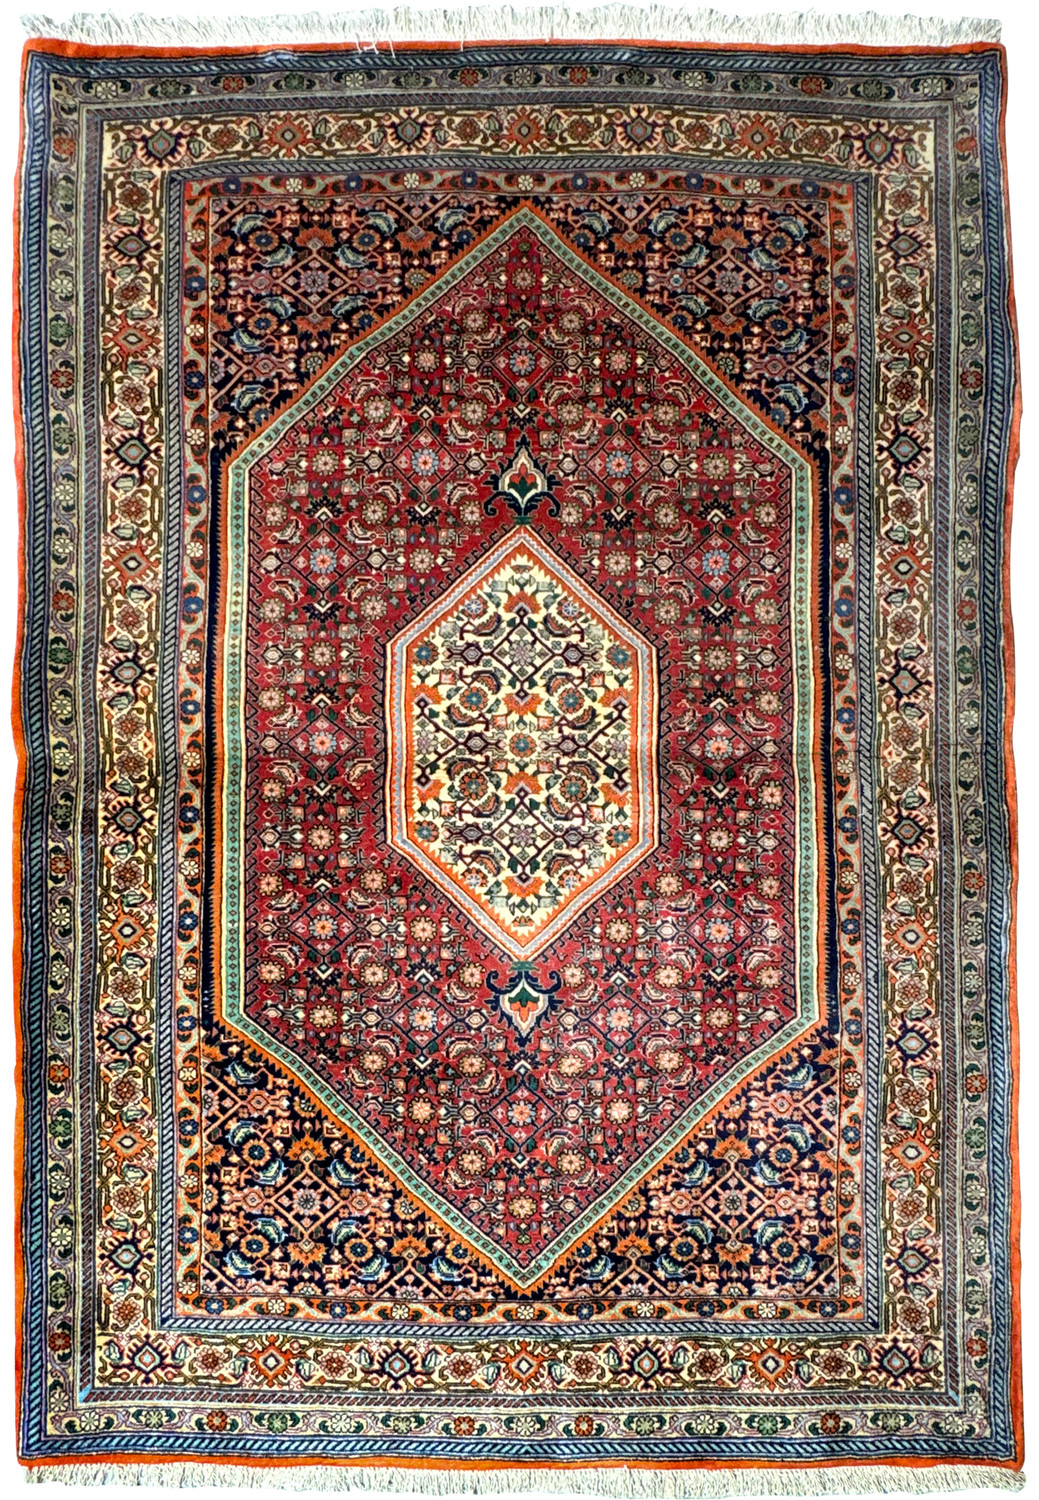 The full view of a 4x6 Persian Bijar rug on a flat surface, displaying the complete design with a prominent red field and a complex, multi-colored border.